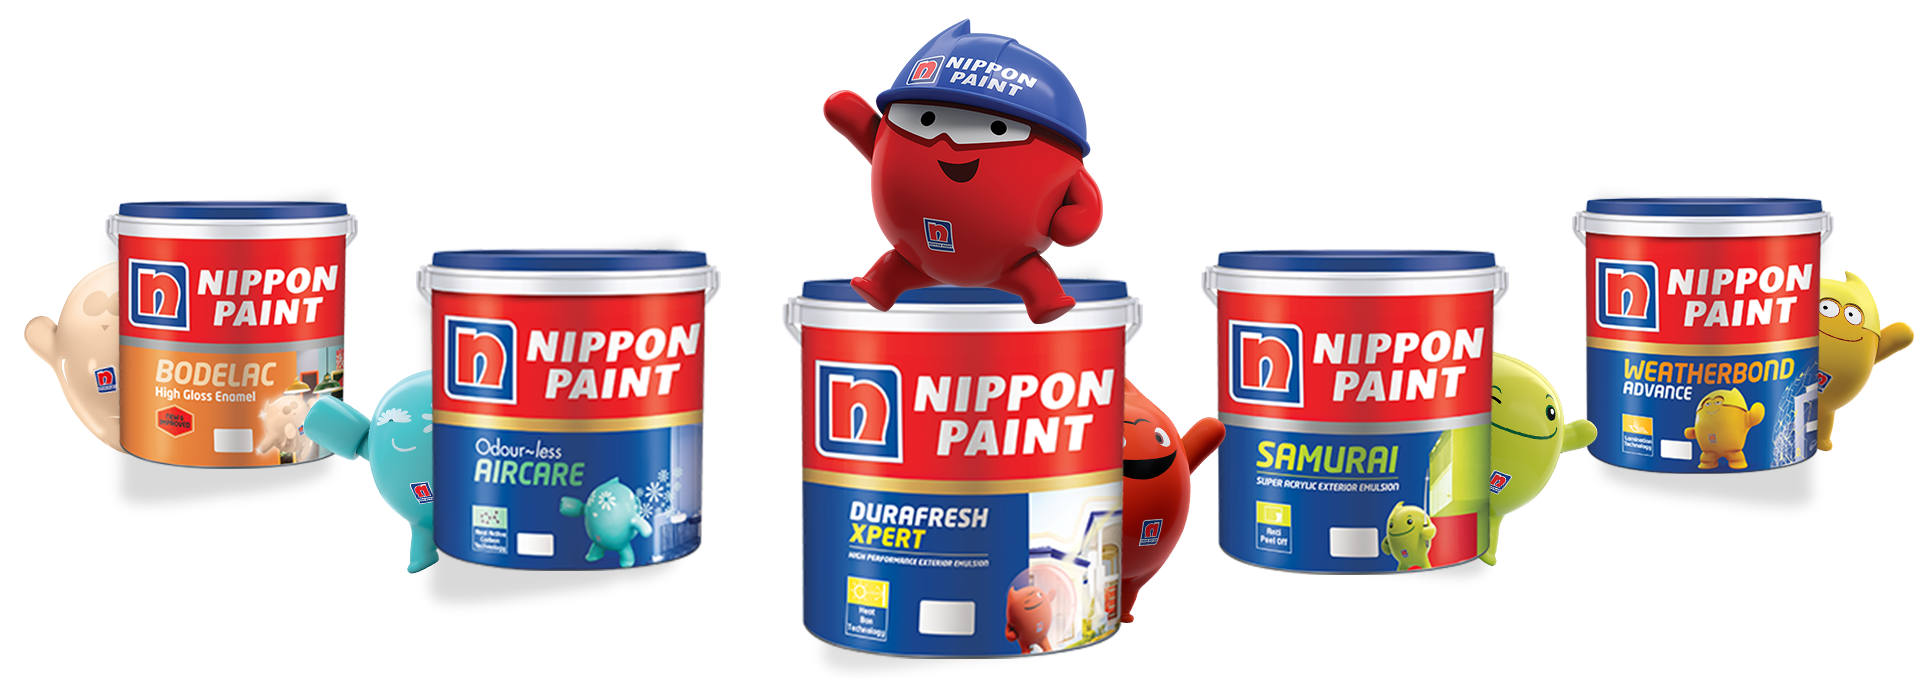  Nippon Paint India  Asia s Real No 1 Paint 